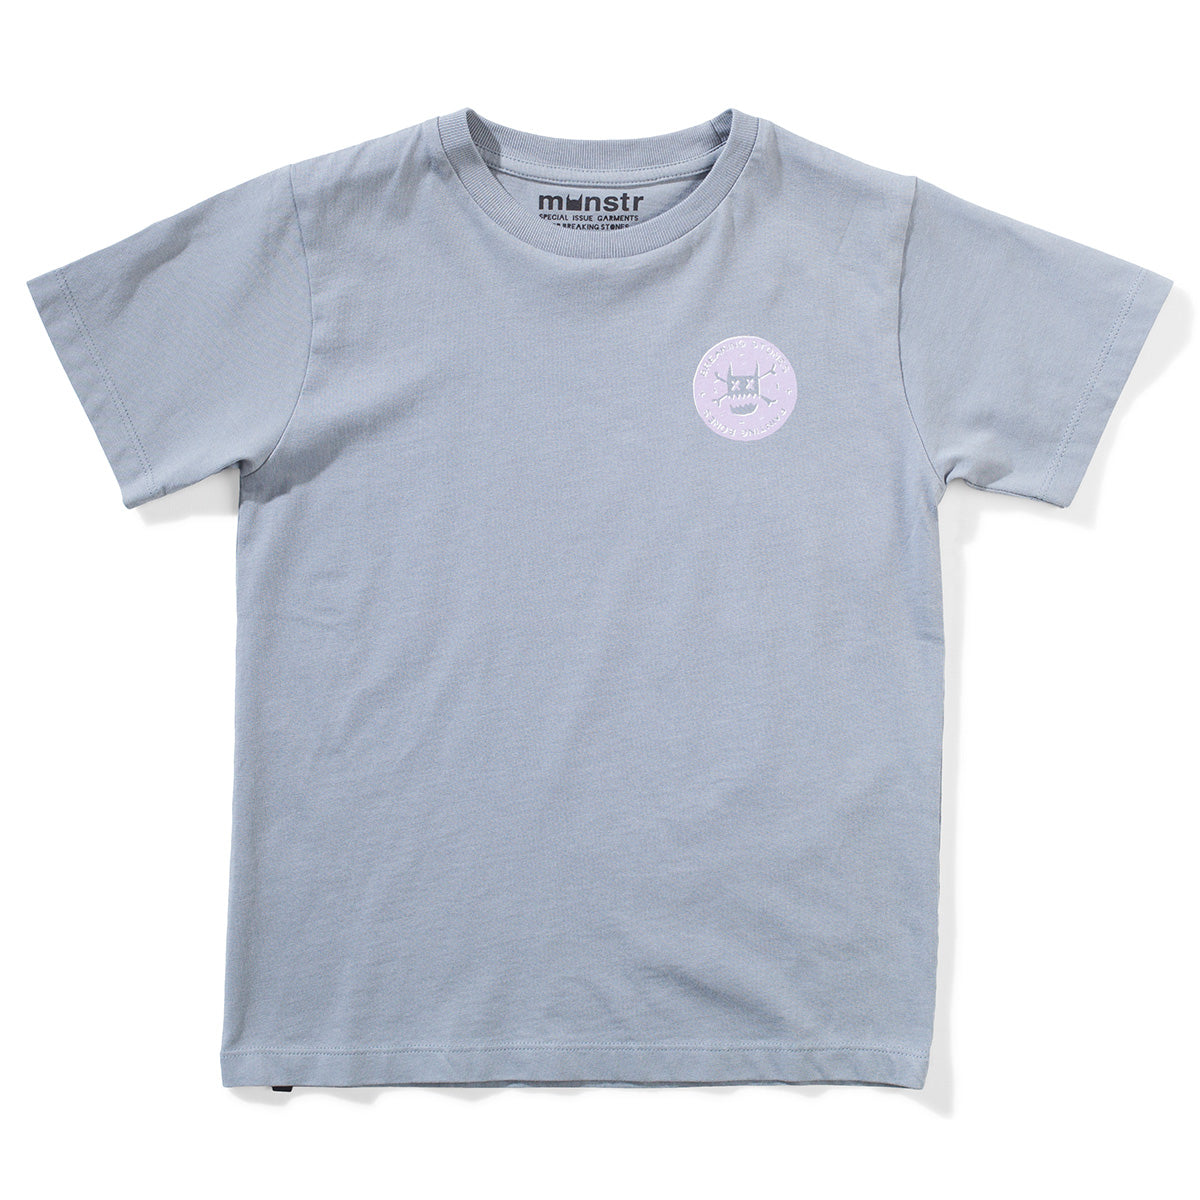 The Stones Short Sleeve Tee from Munster. Crew neck, Short sleeves, Print on the front and back, Sewn in brand label.